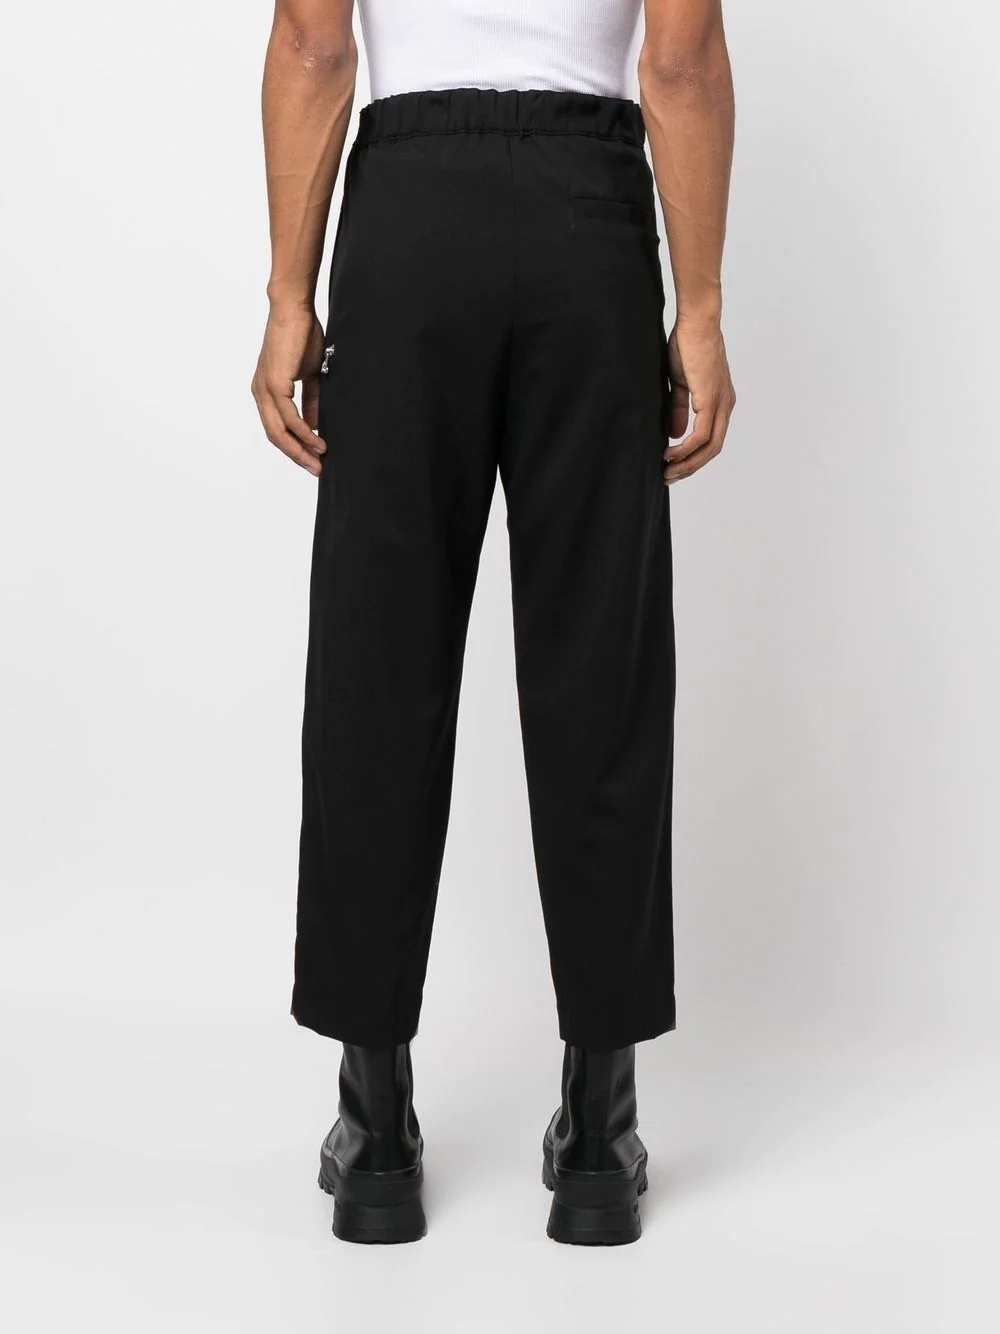 belted-waist straight trousers - 4